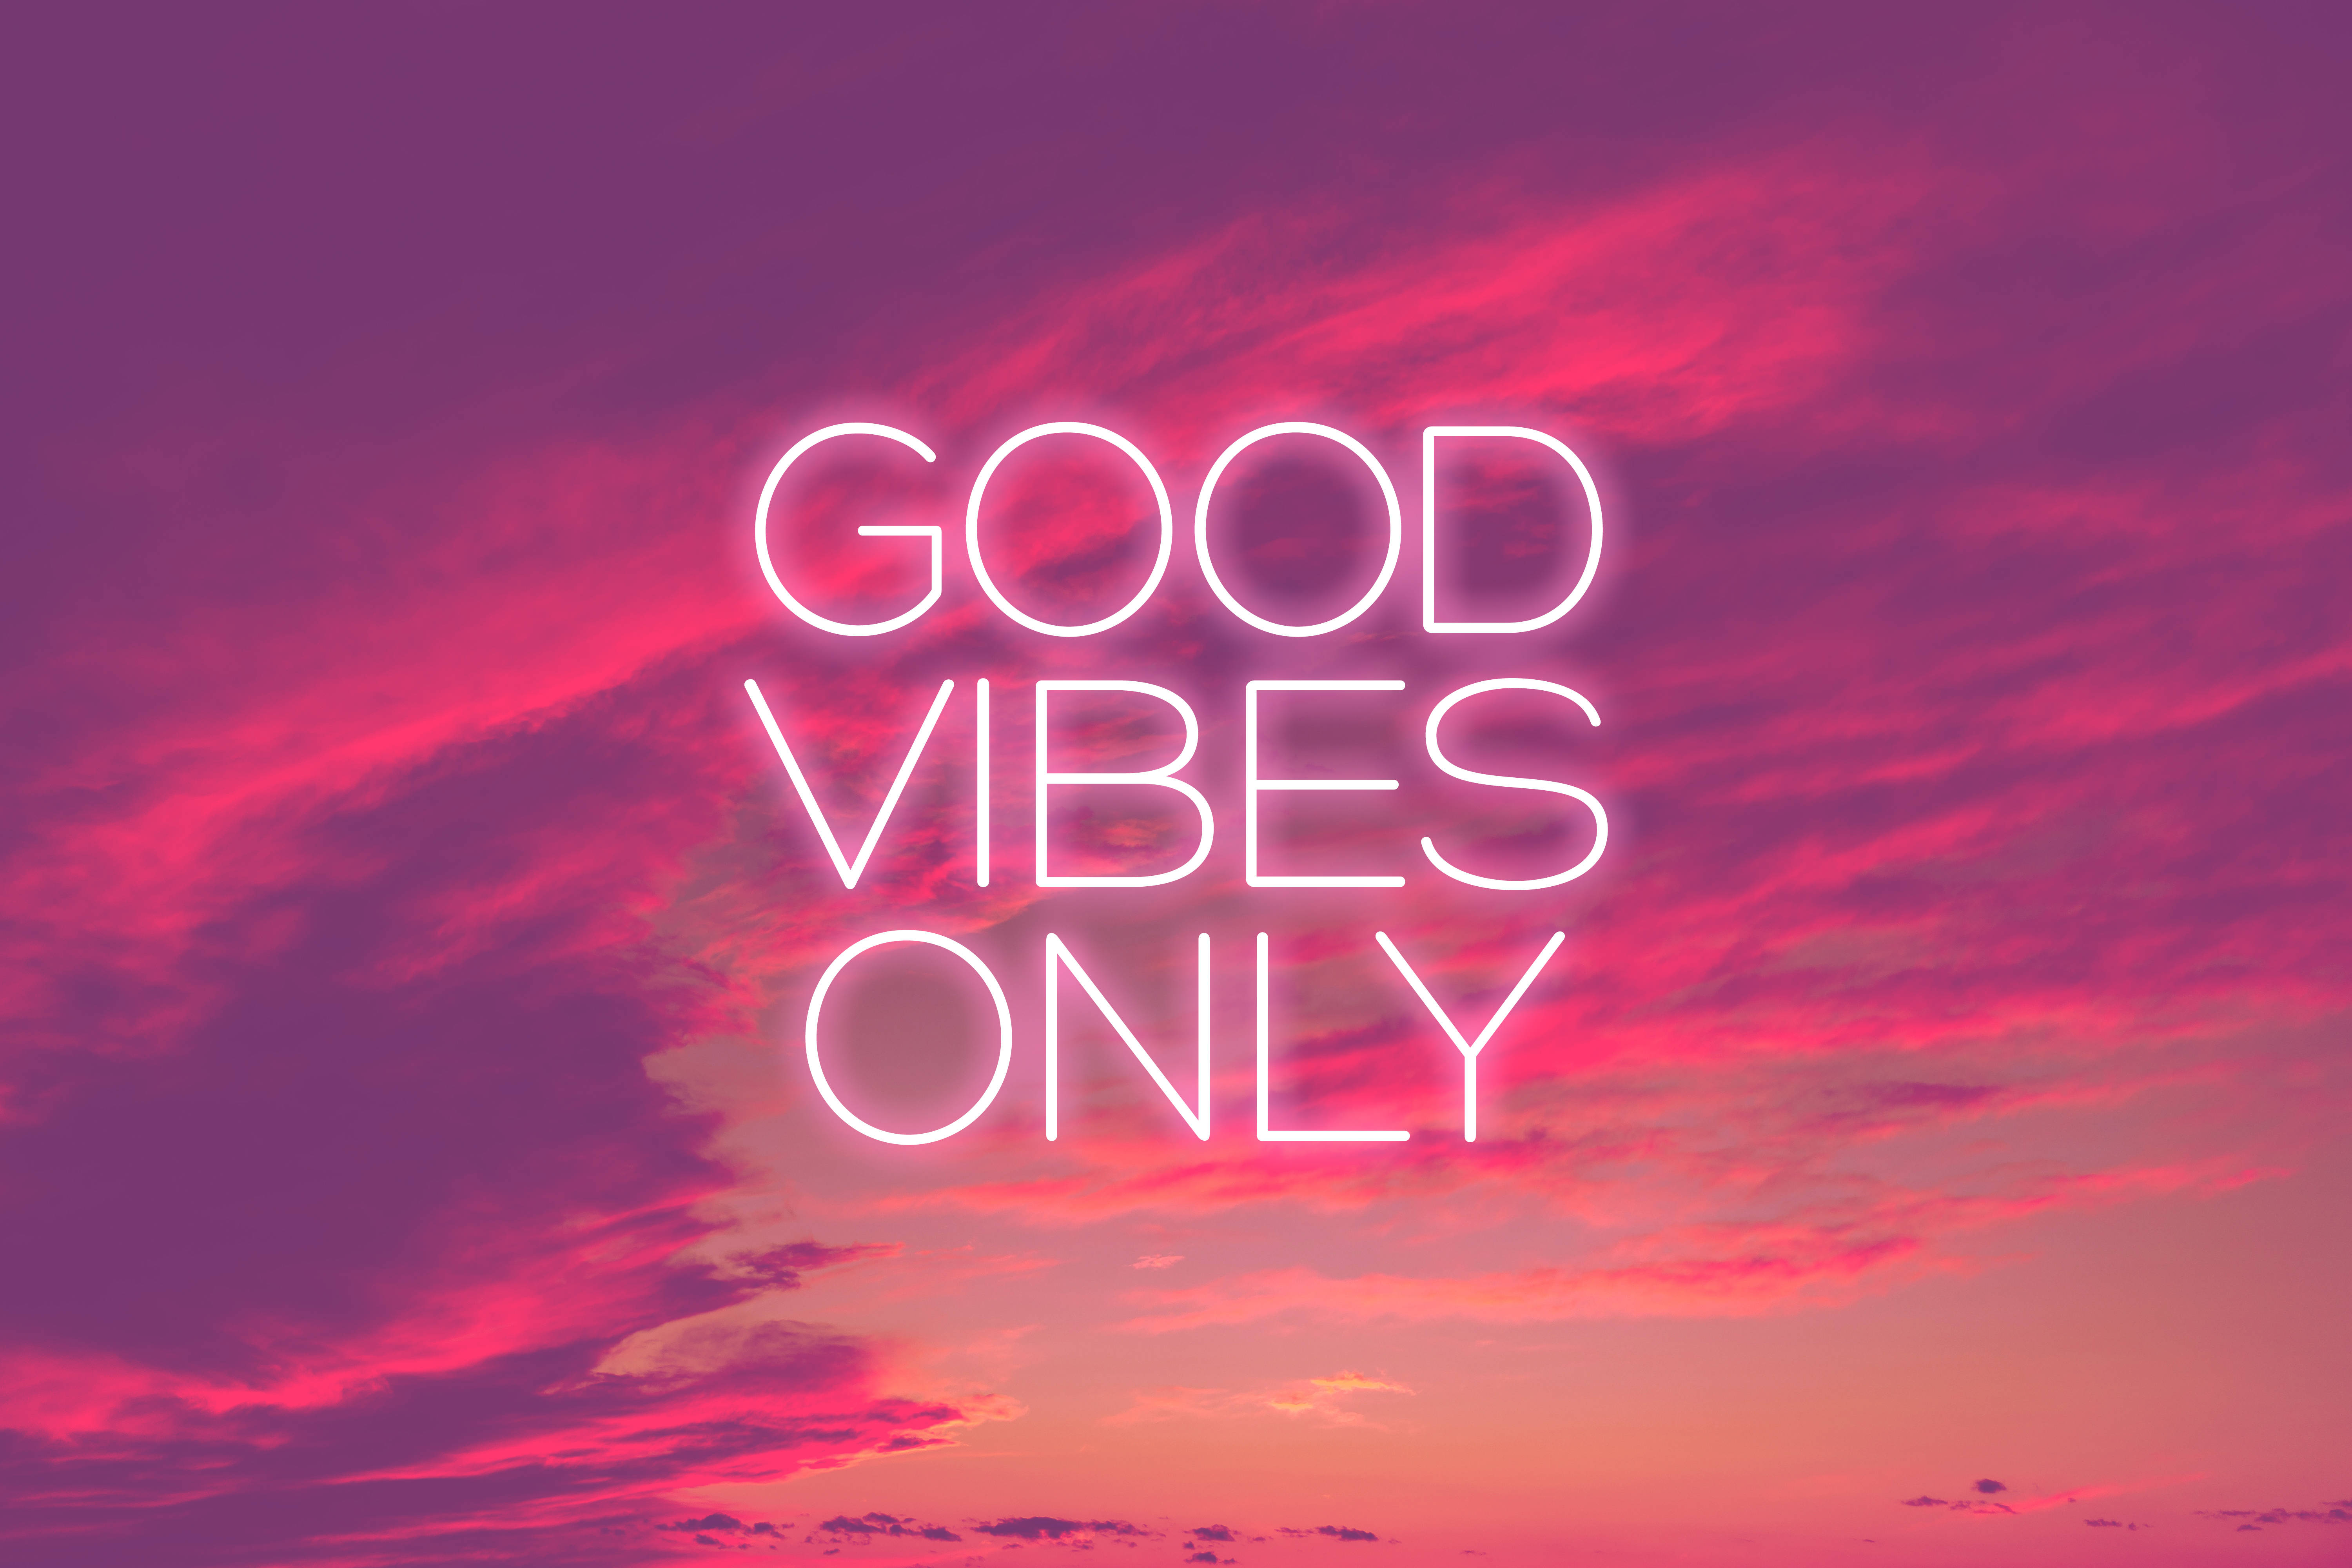 Vibes of freedom. Good Vibes only. Good Vibes картинки. Надпись good Vibes. Good Vibes only обои.